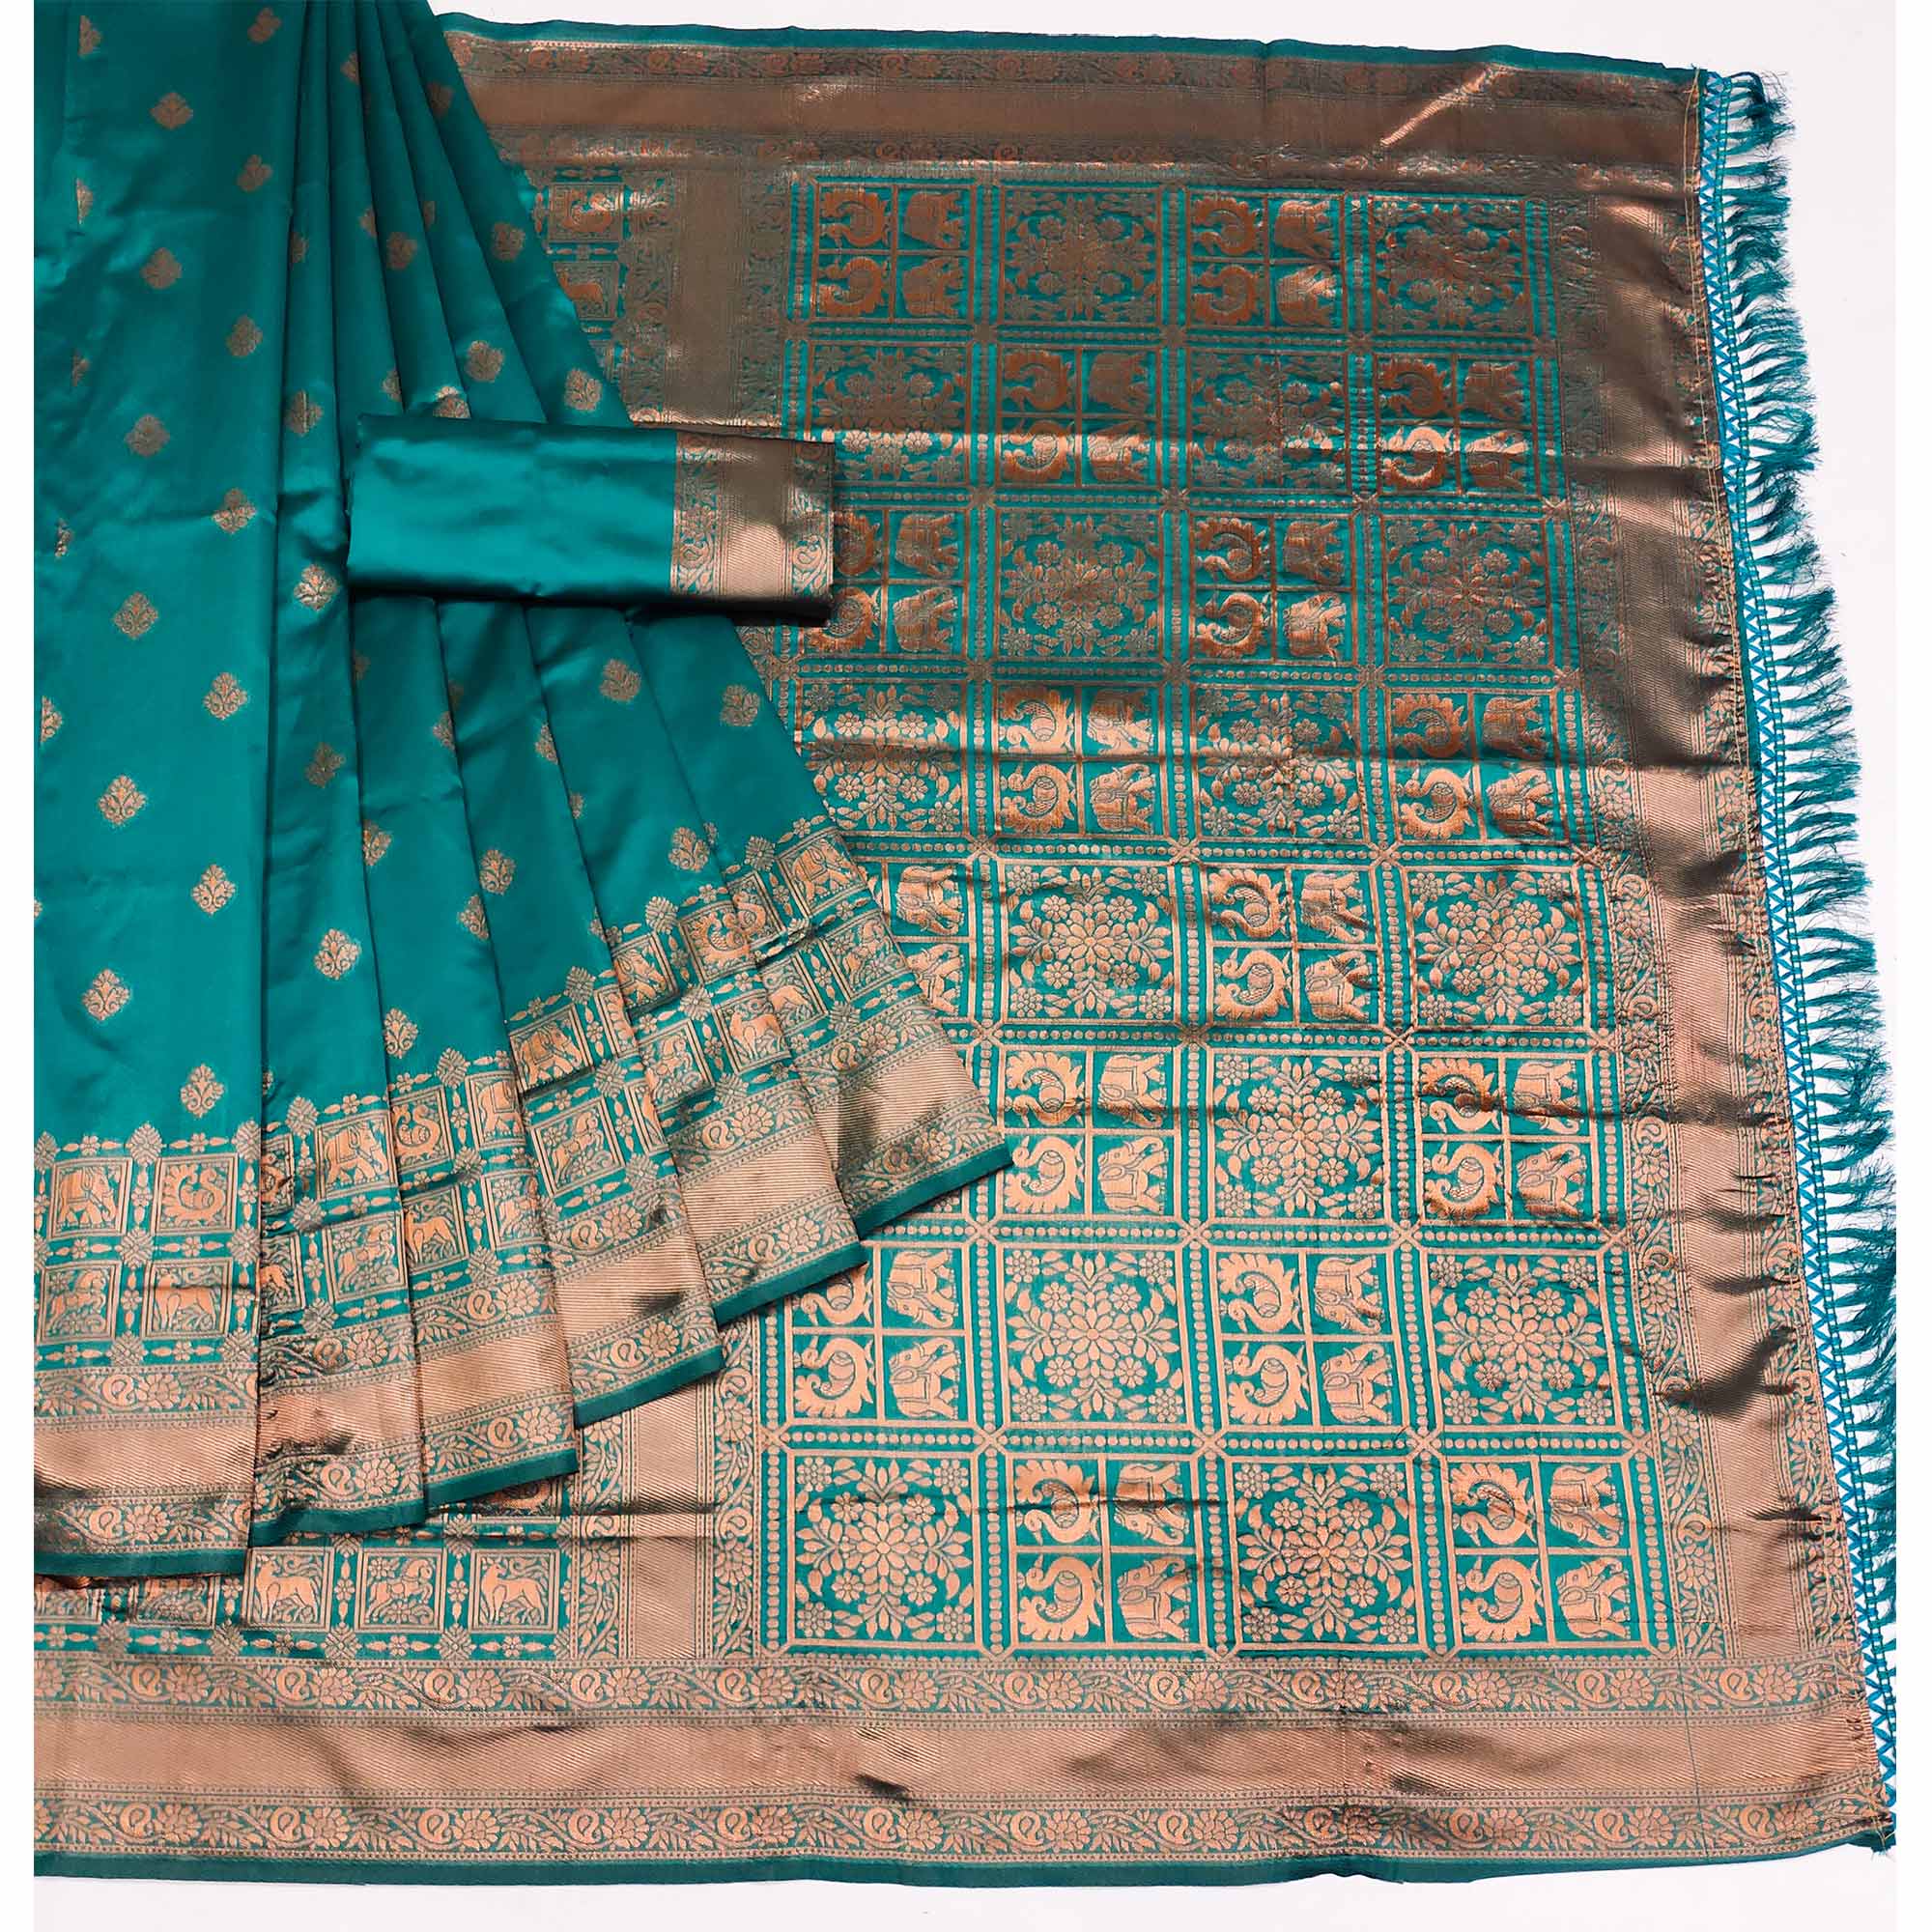 Morpich Woven Jacquard Saree With Tassels